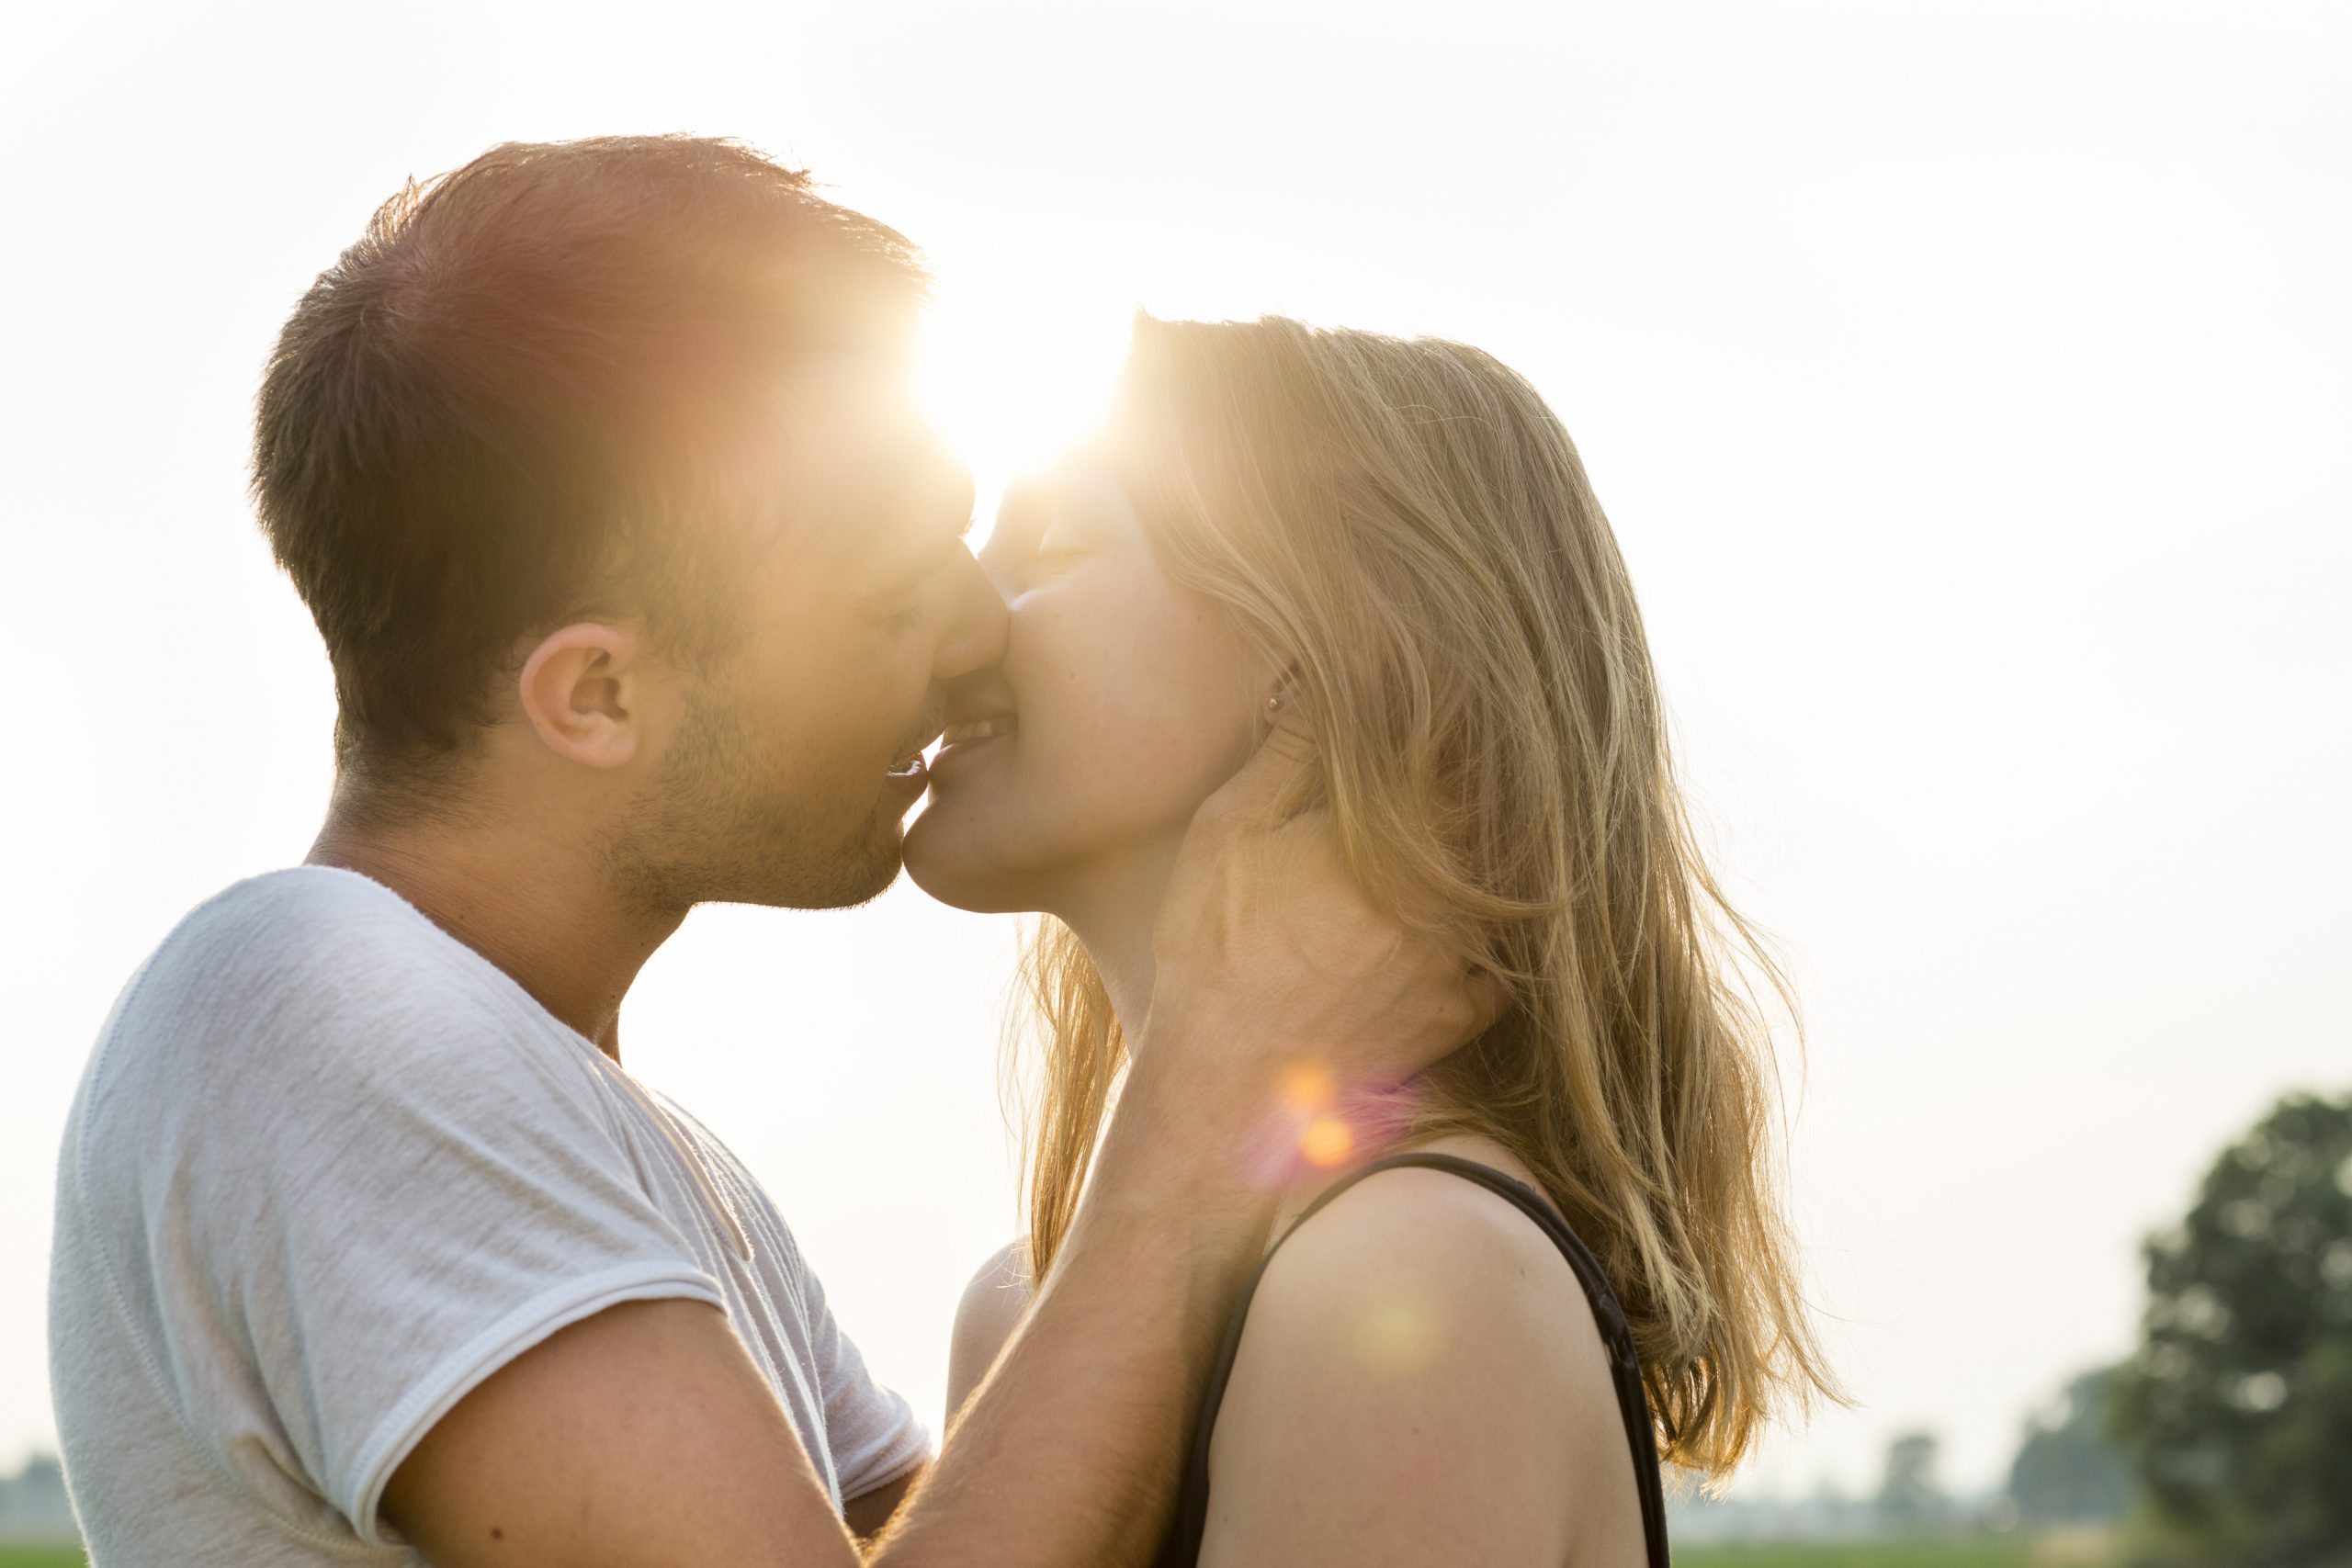 How To Introduce The Kissing Topic To A Girl That Never Did It